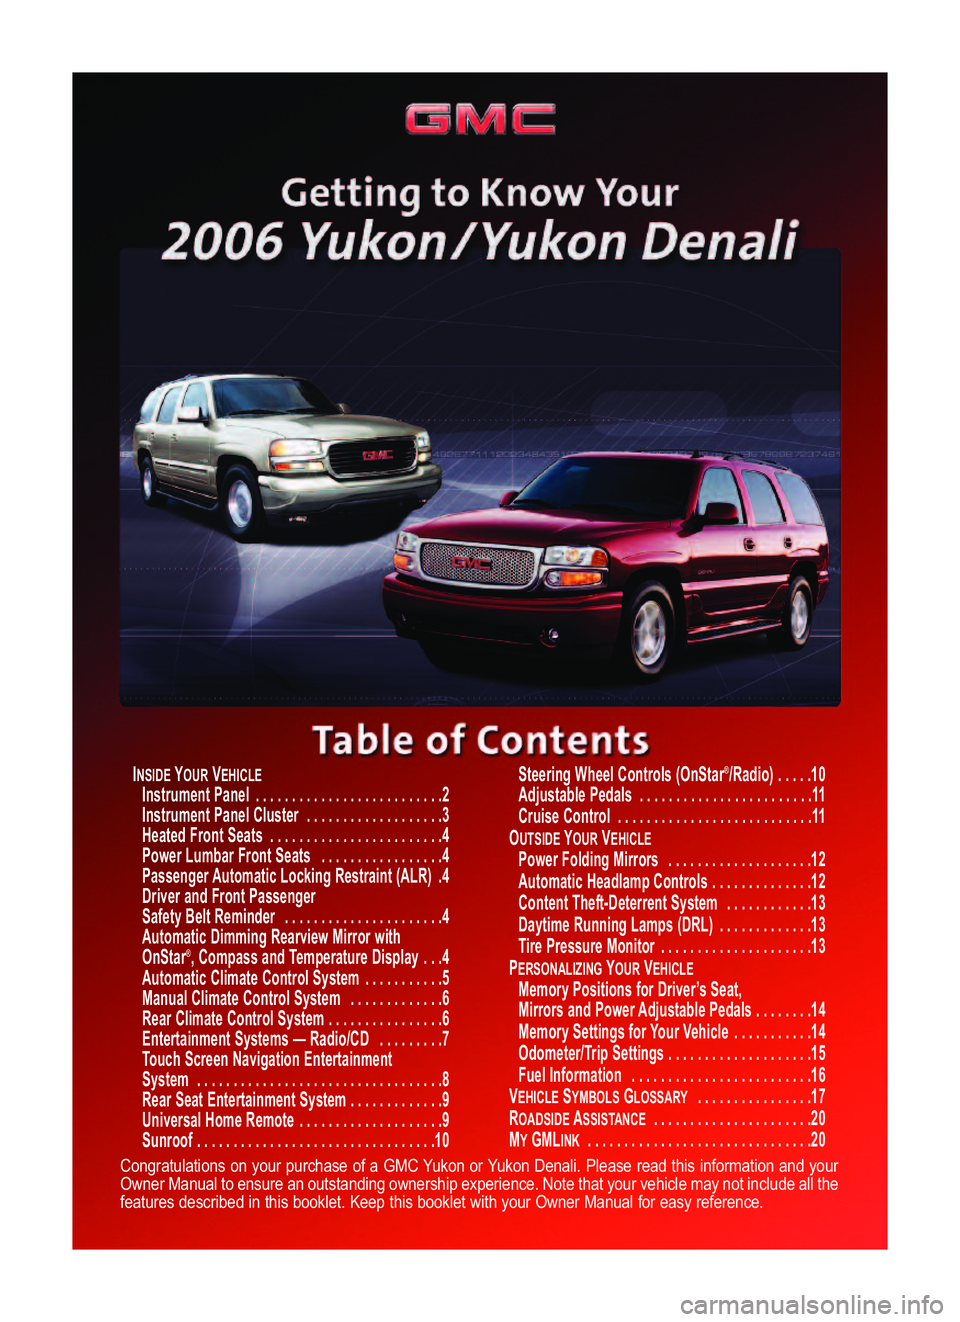 GMC YUKON 2006  Get To Know Guide INSIDEYOURVEHICLEInstrument Panel . . . . . . . . . . . . . . . . . . . . . . . . . .2
Instrument Panel Cluster  . . . . . . . . . . . . . . . . . . .3
Heated Front Seats . . . . . . . . . . . . . . .